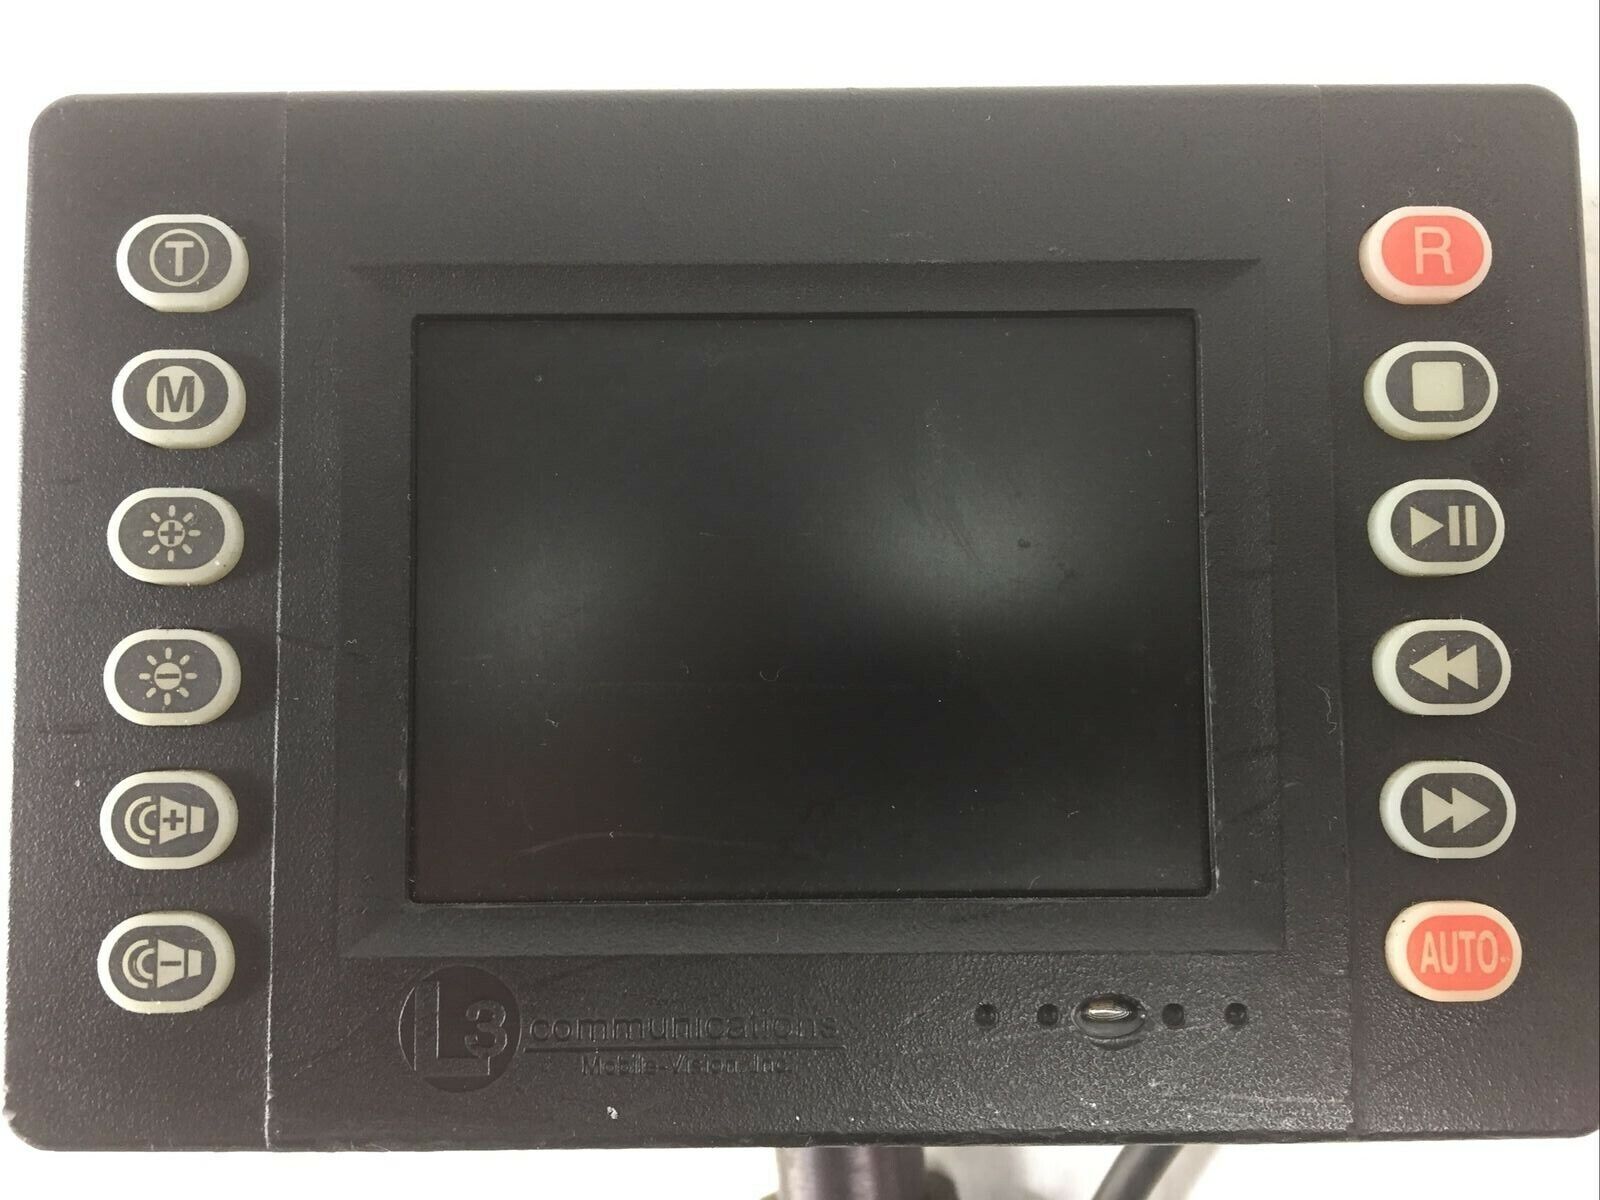 L3 Communications Mobile Vision Police DVR Screen 3.5 TFT LCD Monitor w/ Mount